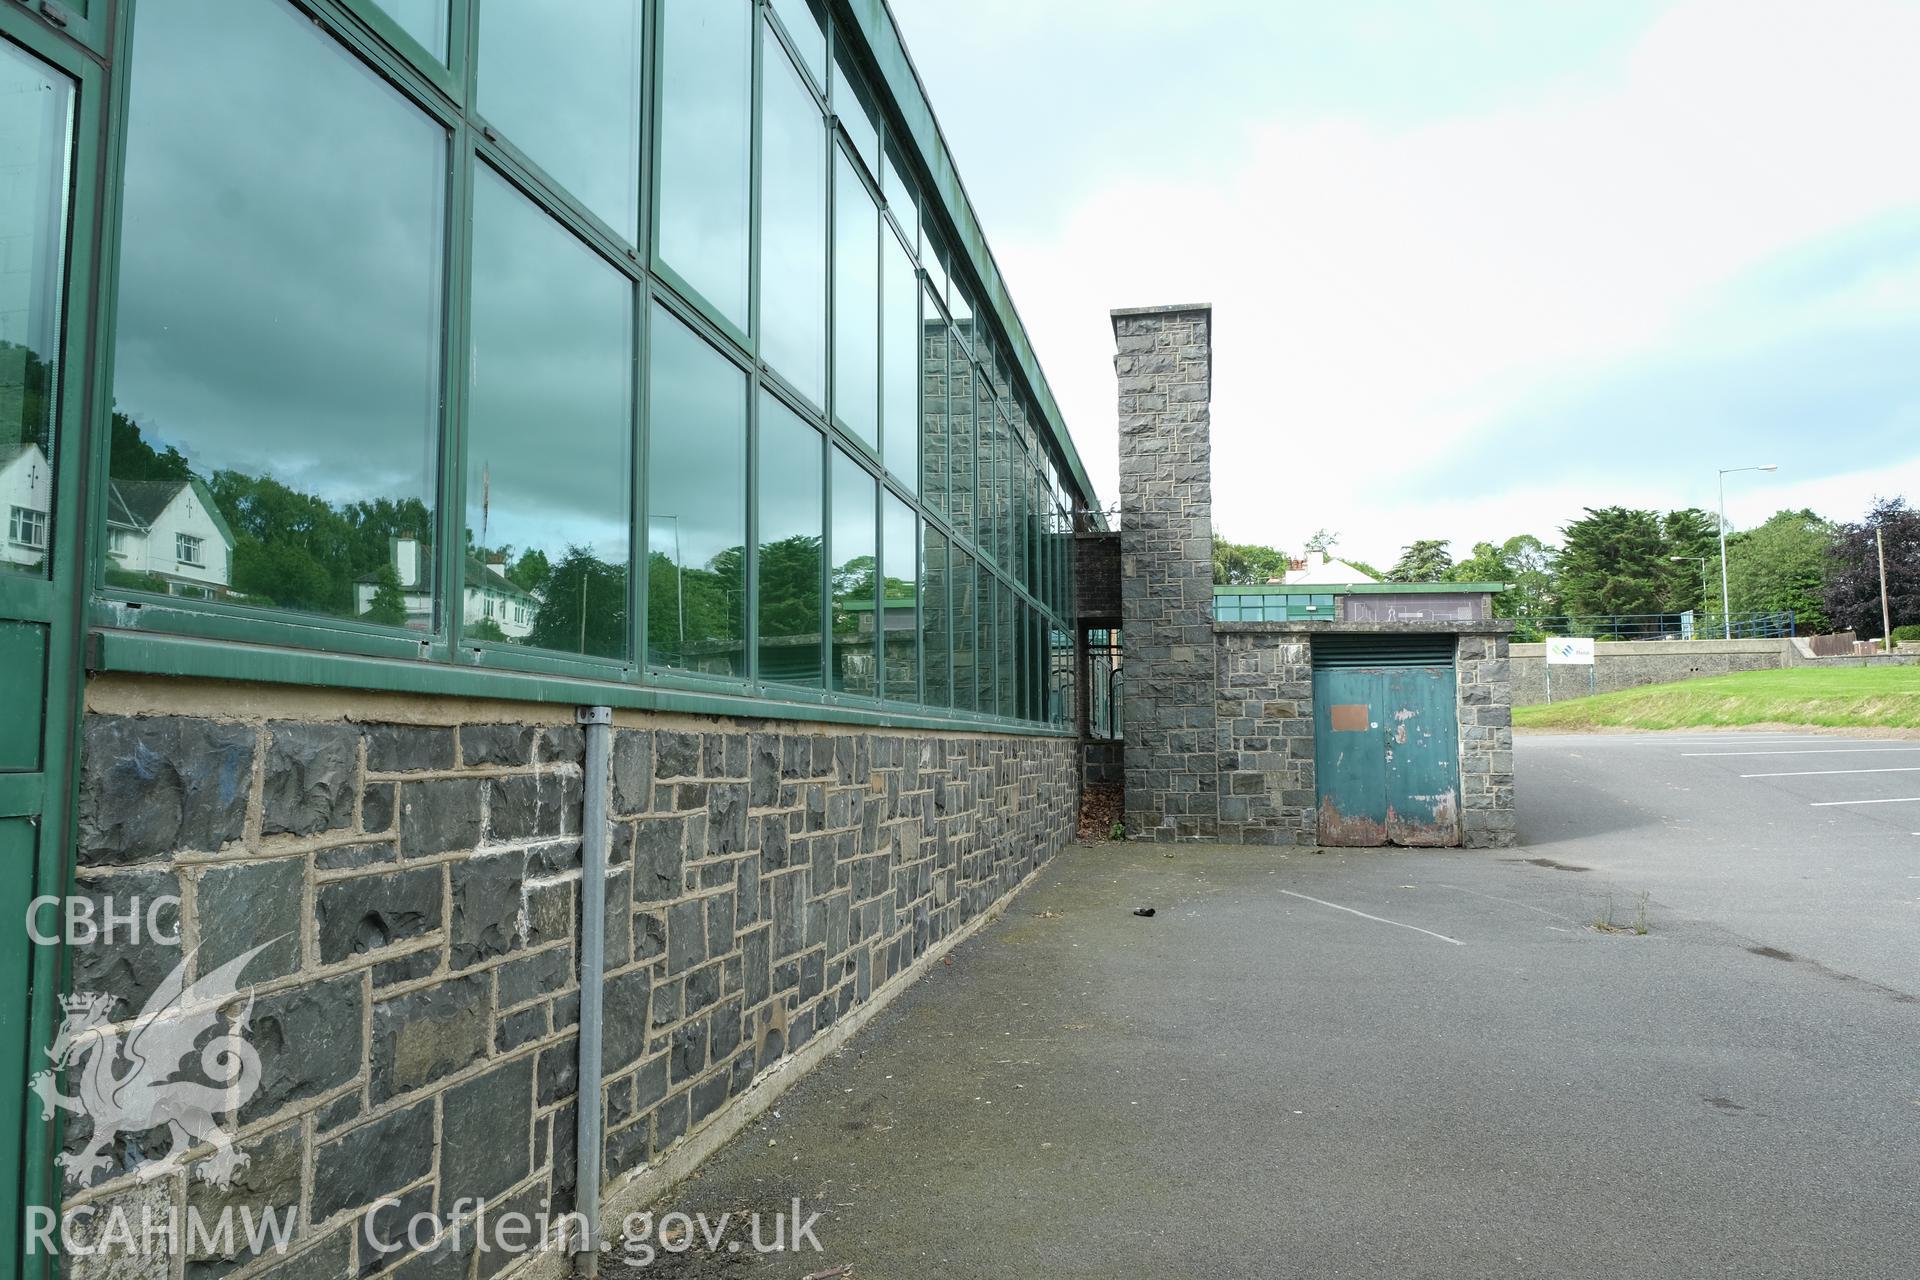 Digital colour photograph showing detailed exterior view of a heavily fenestrated and stone wall at Caernarfonshire Technical College, Bangor. Photographed by Dilys Morgan, donated by Wyn Thomas of Grwp Llandrillo-Menai Further Education College, 2019.